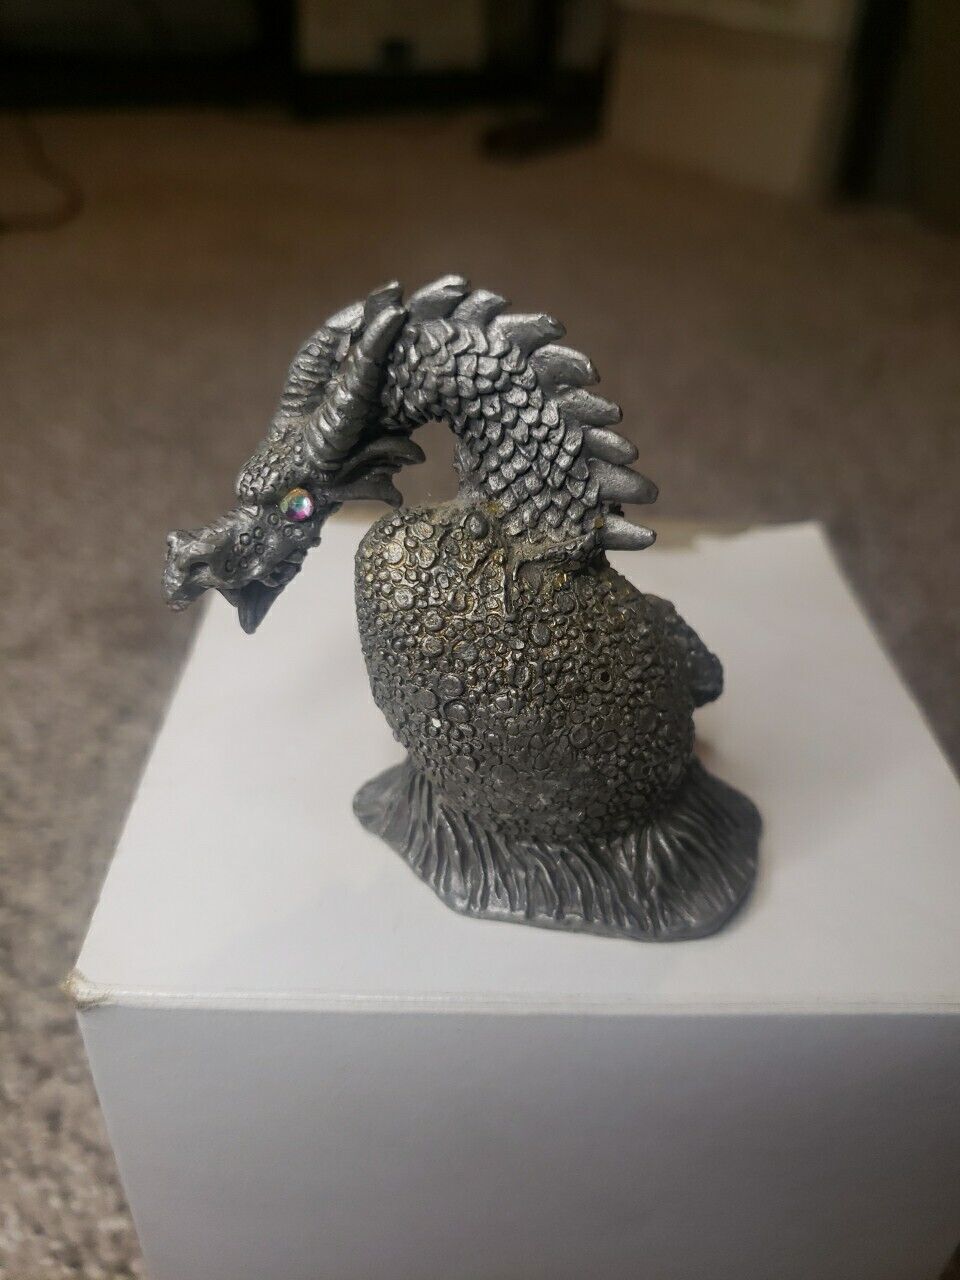 Rawcliffe Pewter Figurine Dragon Hatching from Egg 